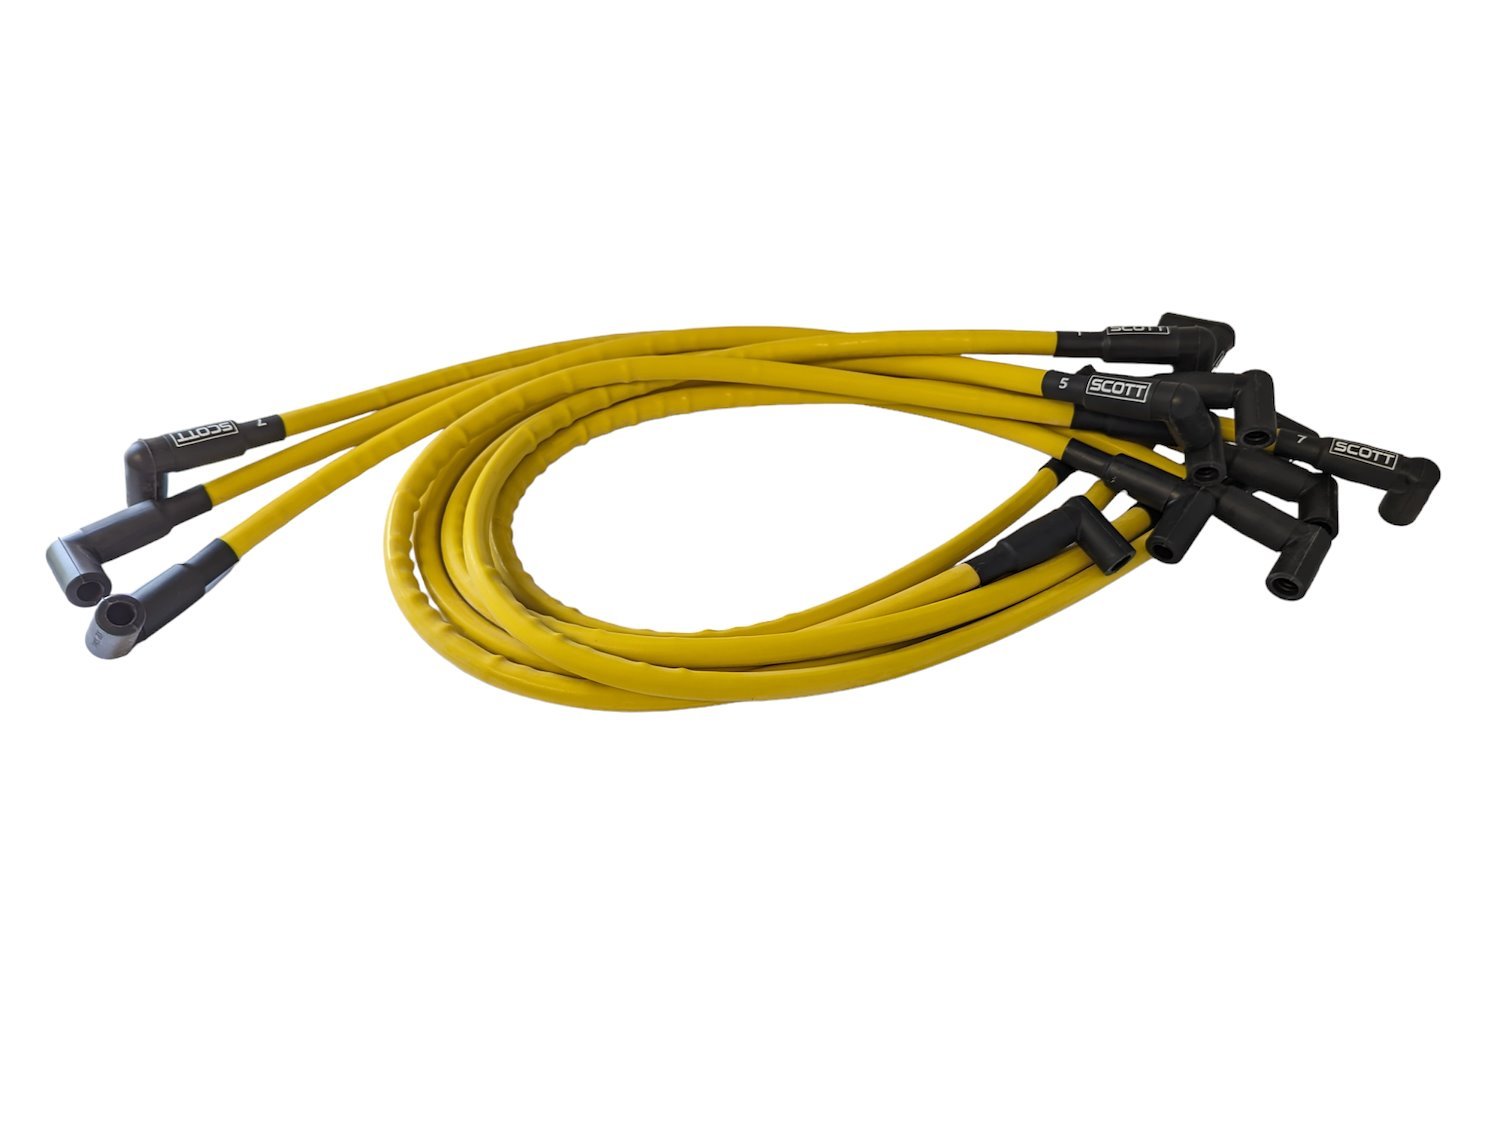 SPW-CH-435-7 High-Performance Silicone-Sleeved Spark Plug Wire Set for Small Block Chevy, Around Front [Yellow]